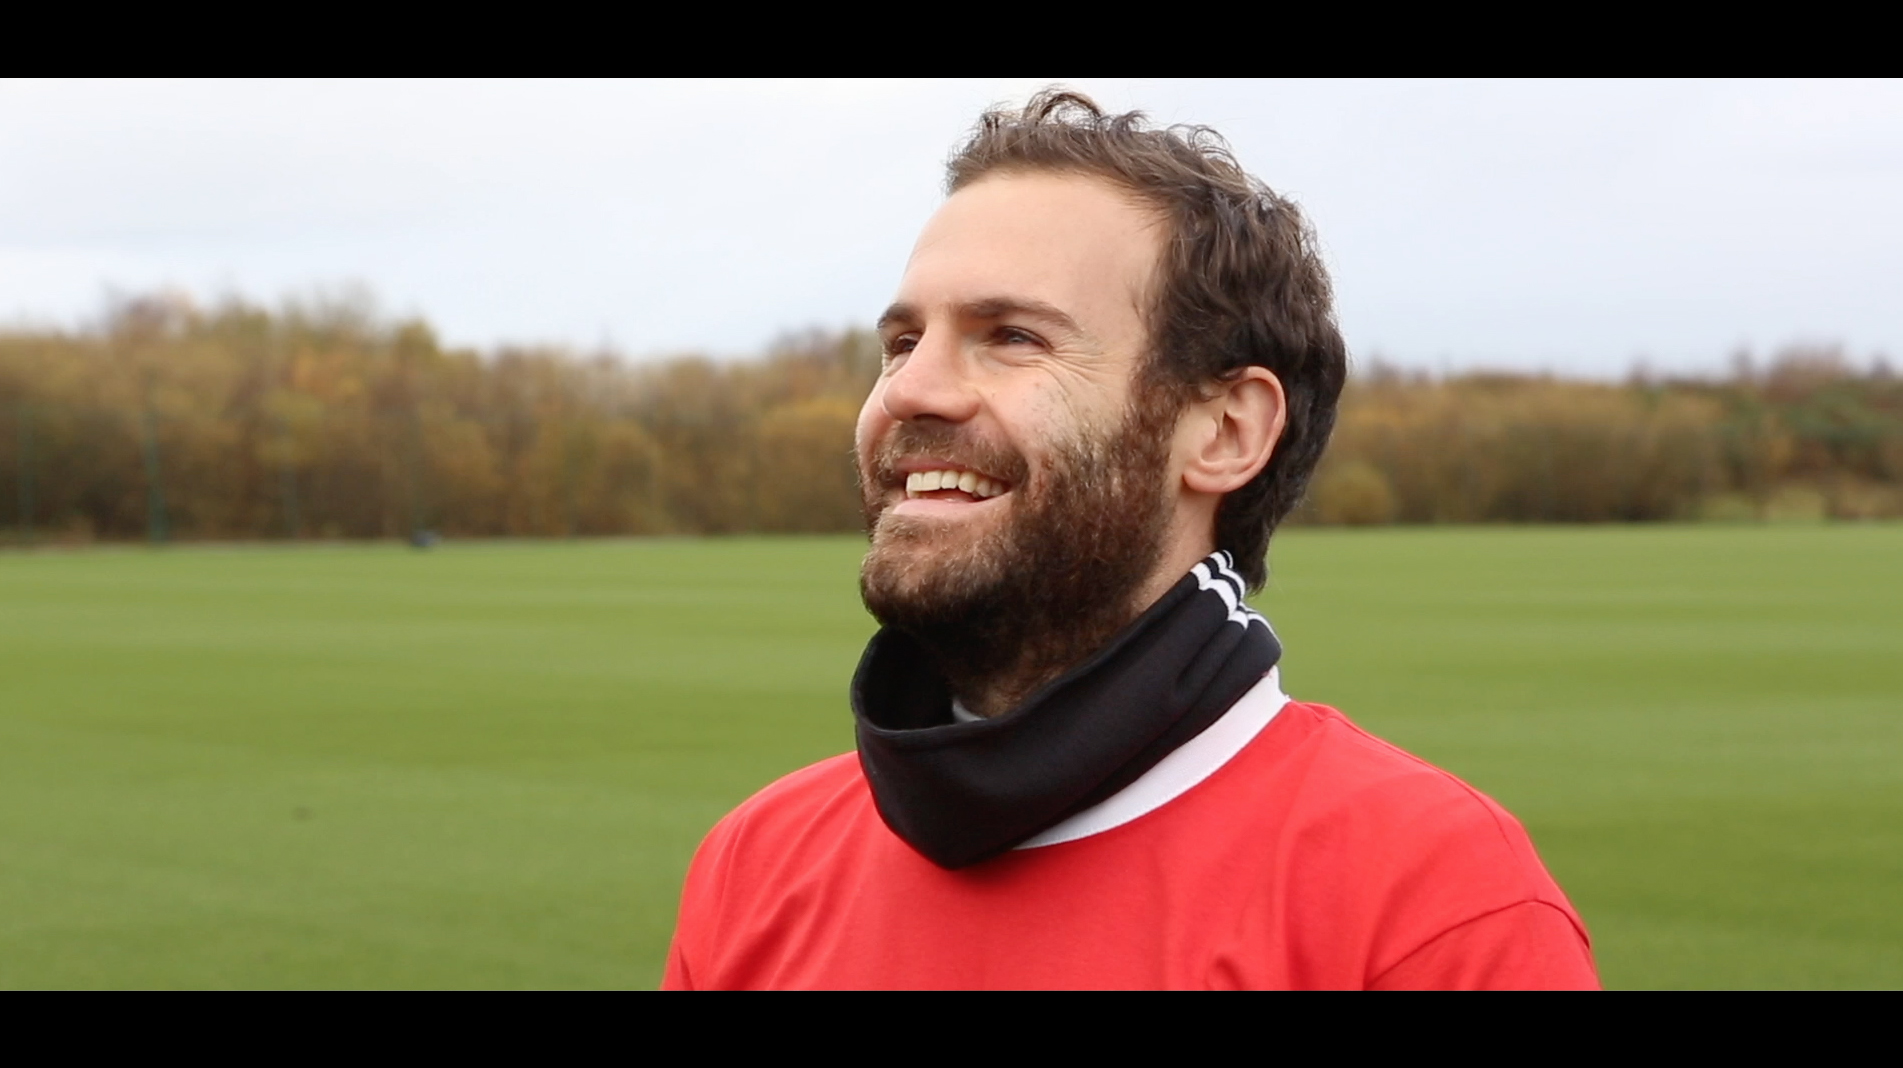 Juan Mata for “Finding You” Campaign